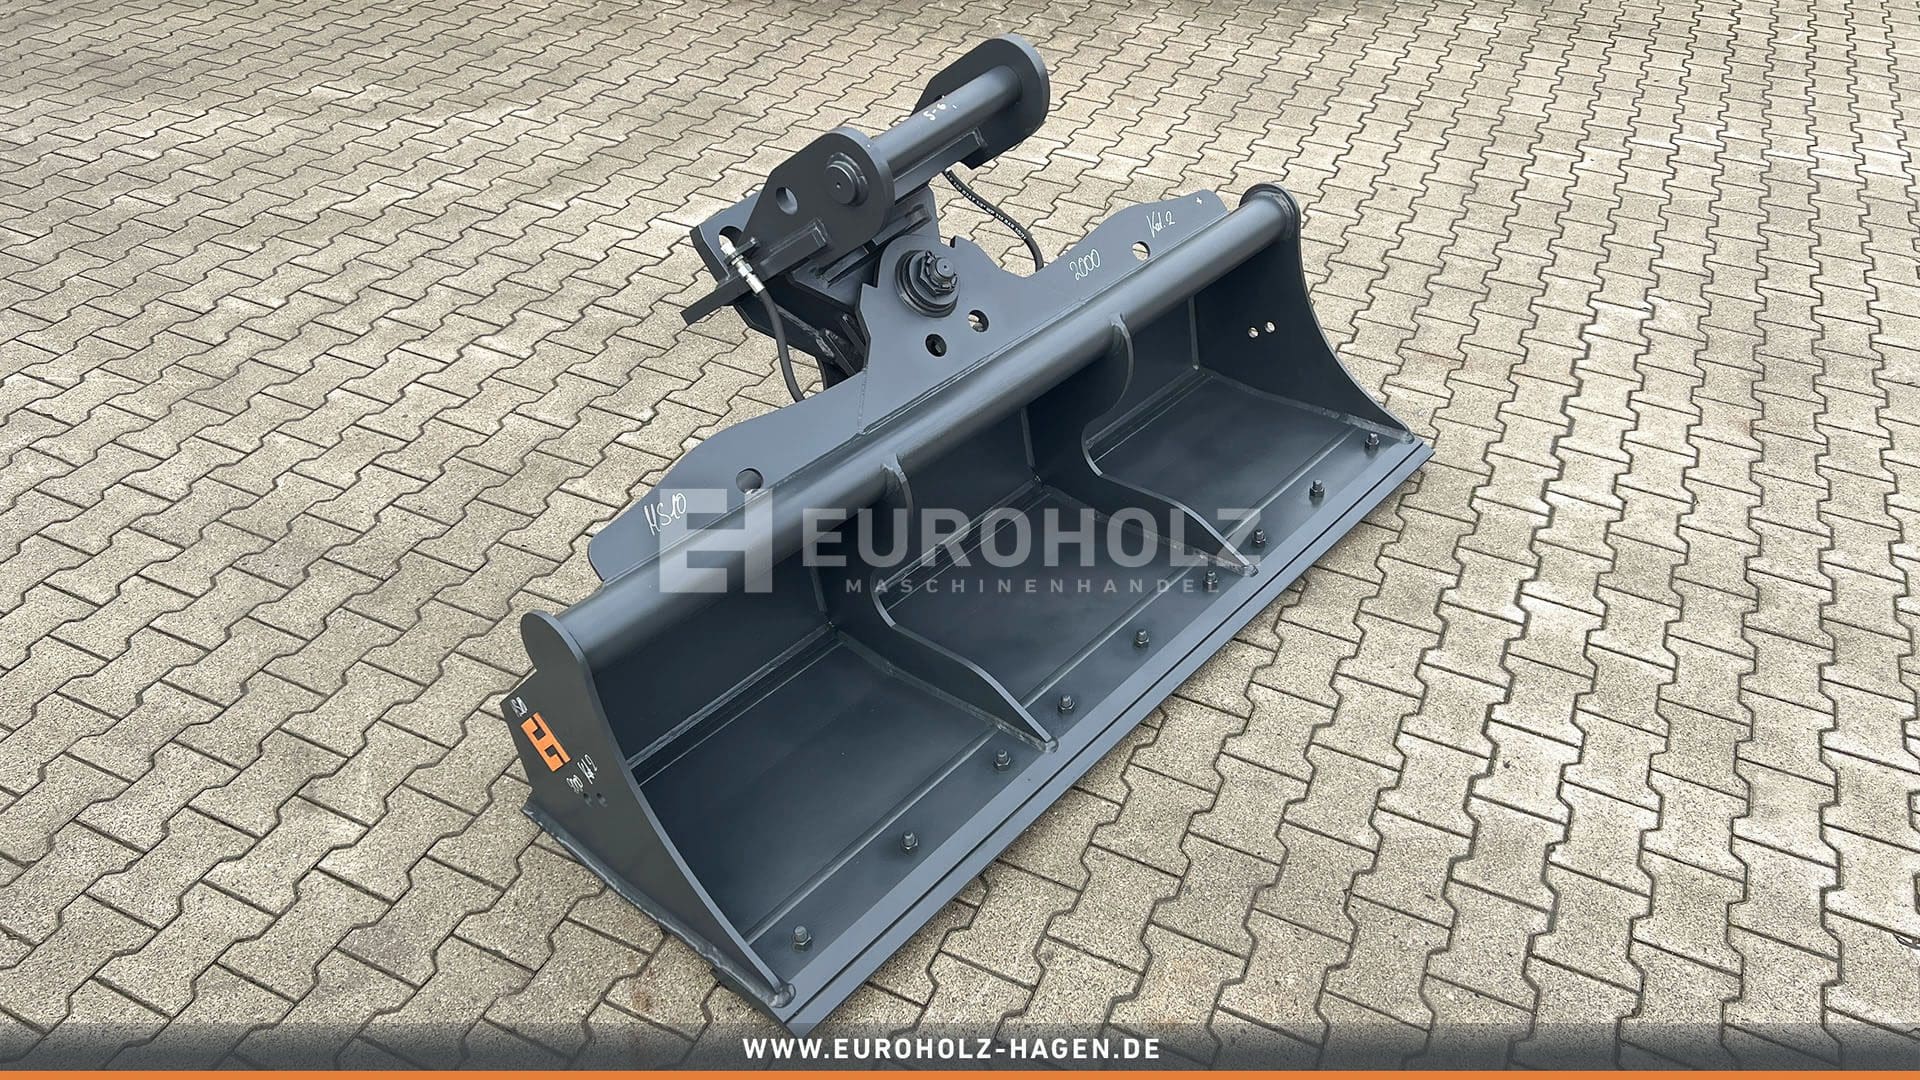 Hydraulic ditch cleaning bucket suitable for Lehnhoff MS10 / 2000 mm / cat. 2G / with bolt-on cutting edge